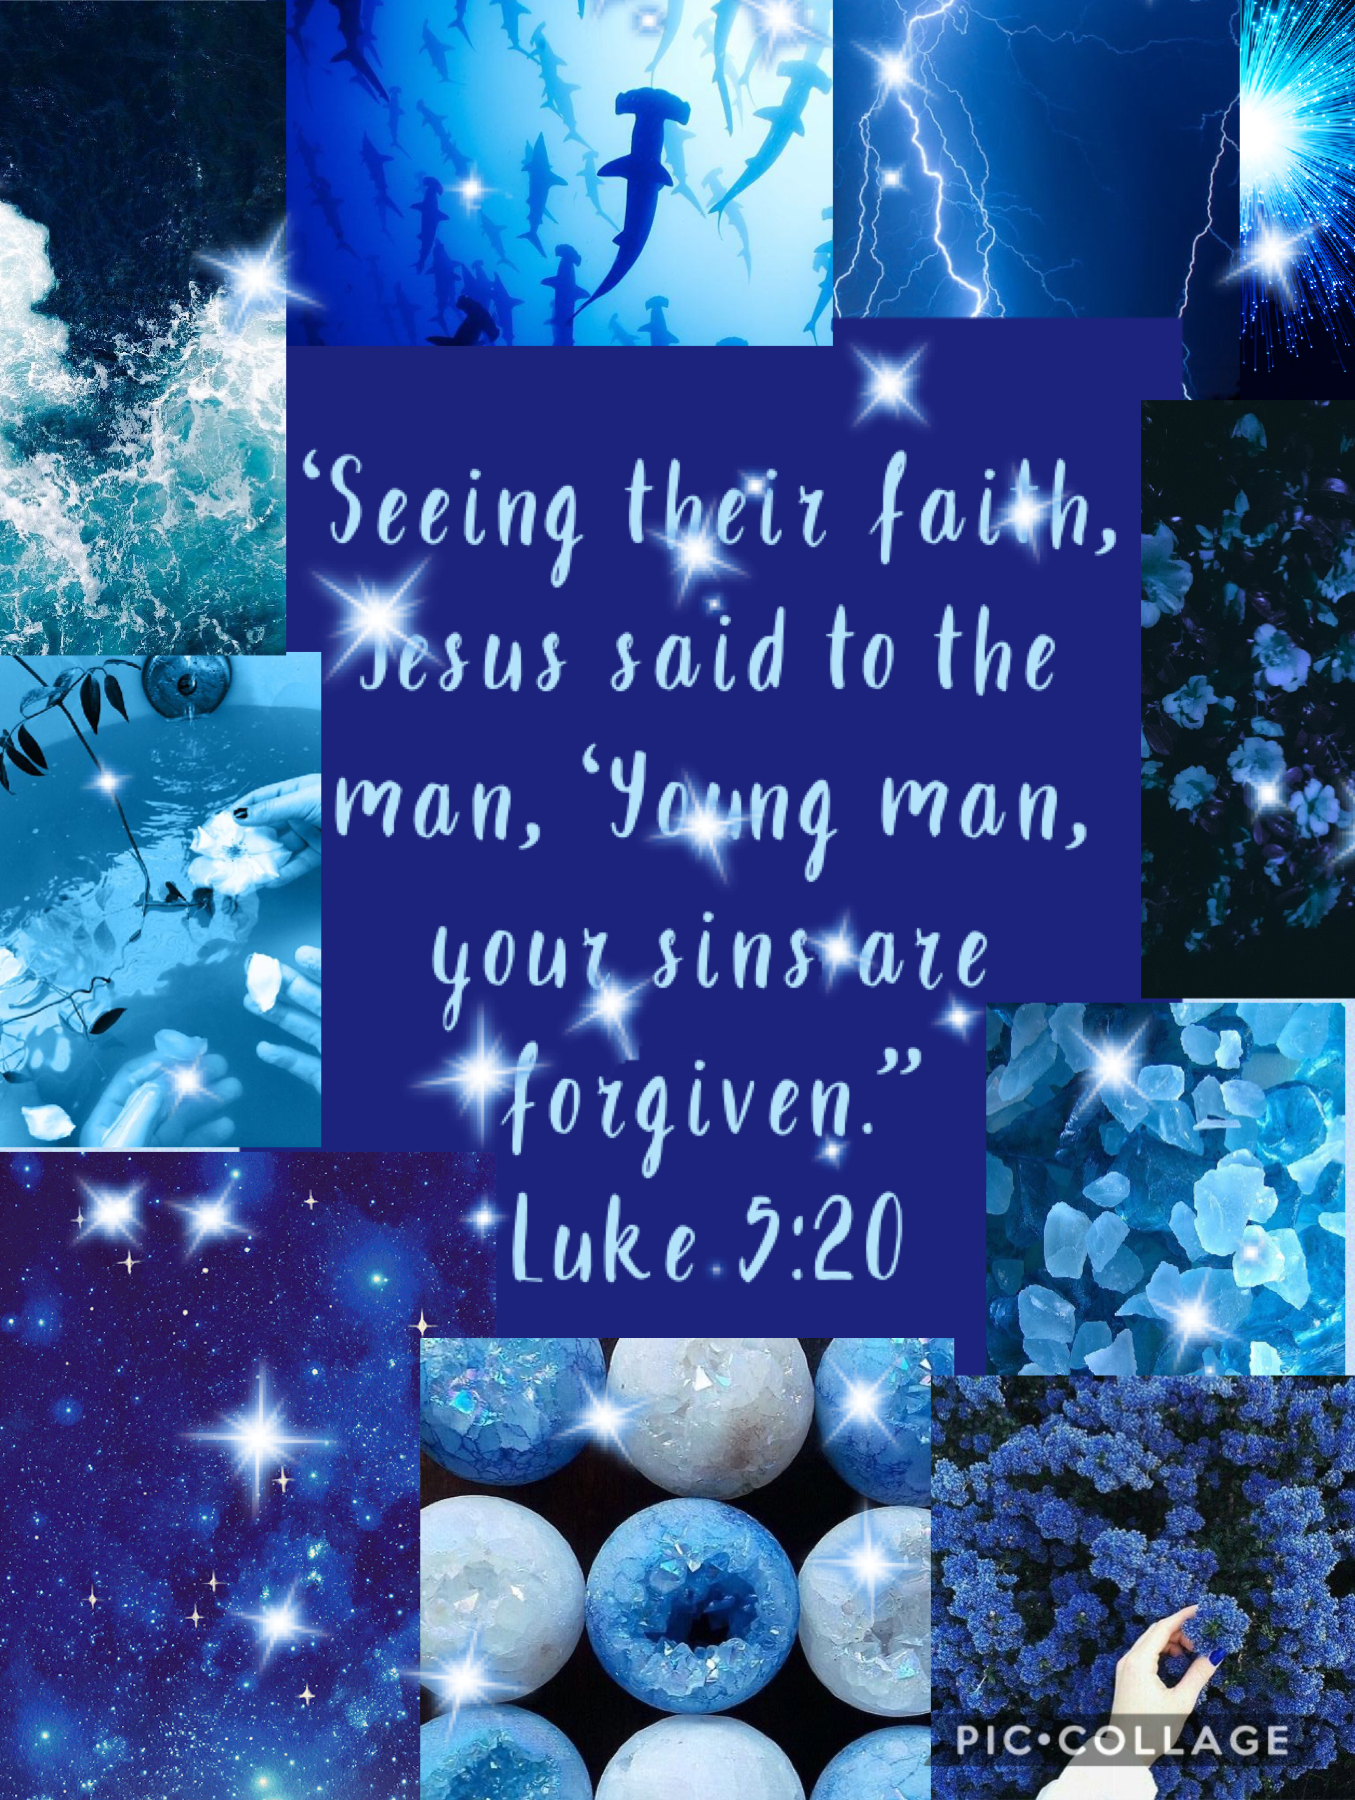 Luke 5:20 


#blue #Bible #forgive #hope #happy #collage #piccollage #thanks #happiness #verses #Bibleverse #sins 